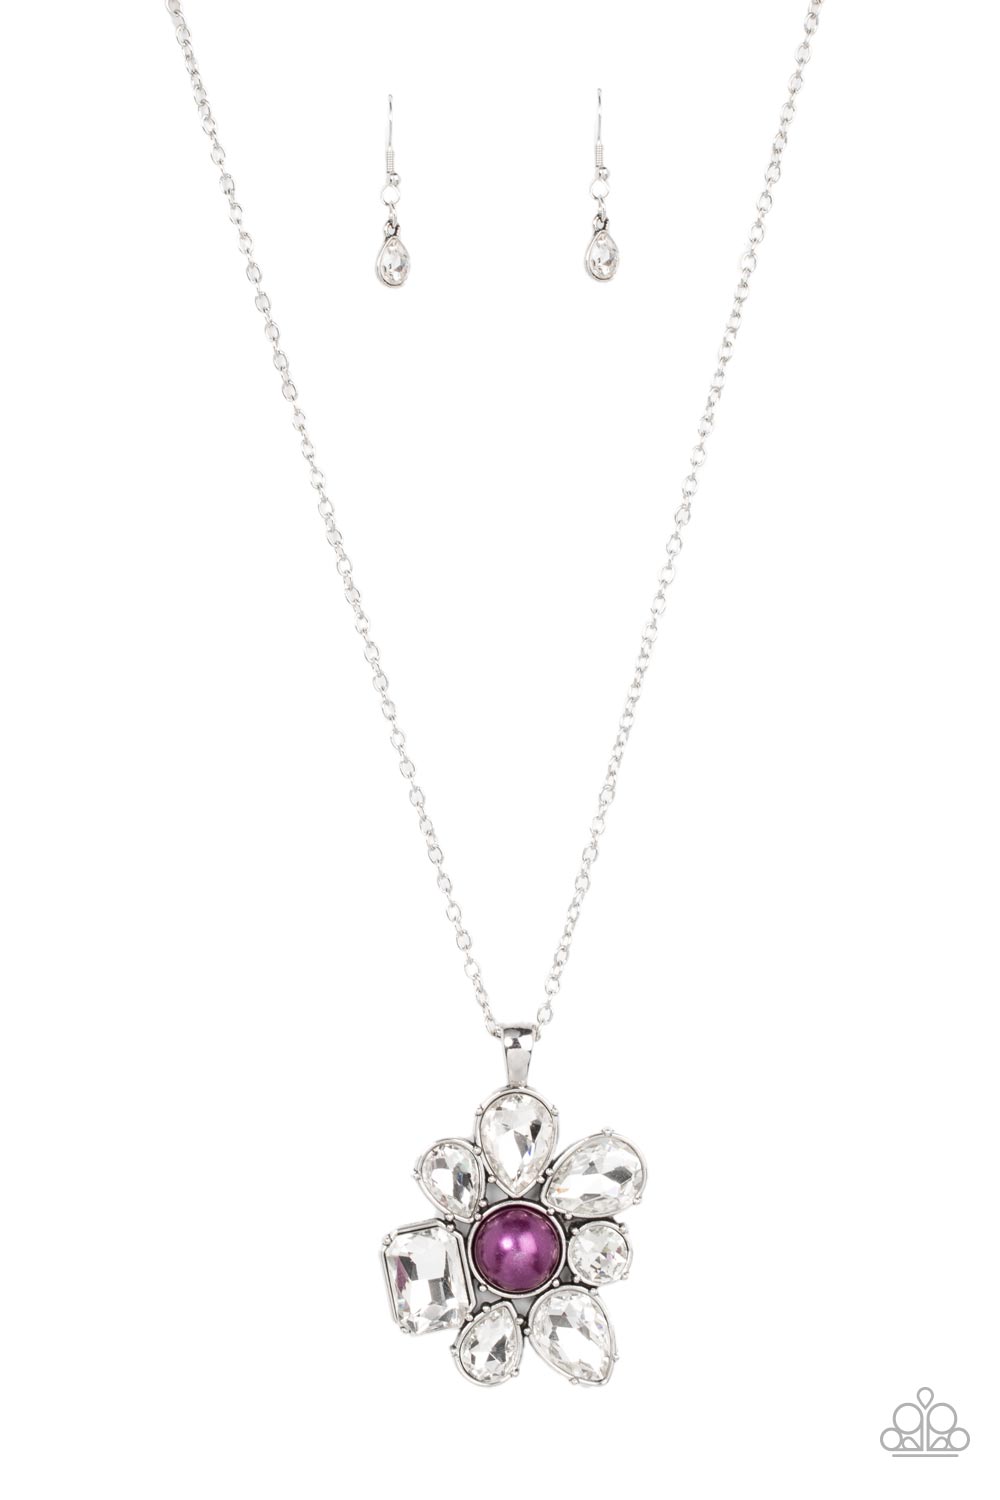 BLOOM Shaka-Laka - Purple Pearl - Silver Floral Necklace - Paparazzi Accessories - Encased in pronged silver fittings, a mismatched collection of oversized teardrop, round, and emerald cut rhinestones asymmetrically blooms from a bubbly purple pearl drop center for a surprisingly sparkly floral pendant at the bottom of a silver chain.